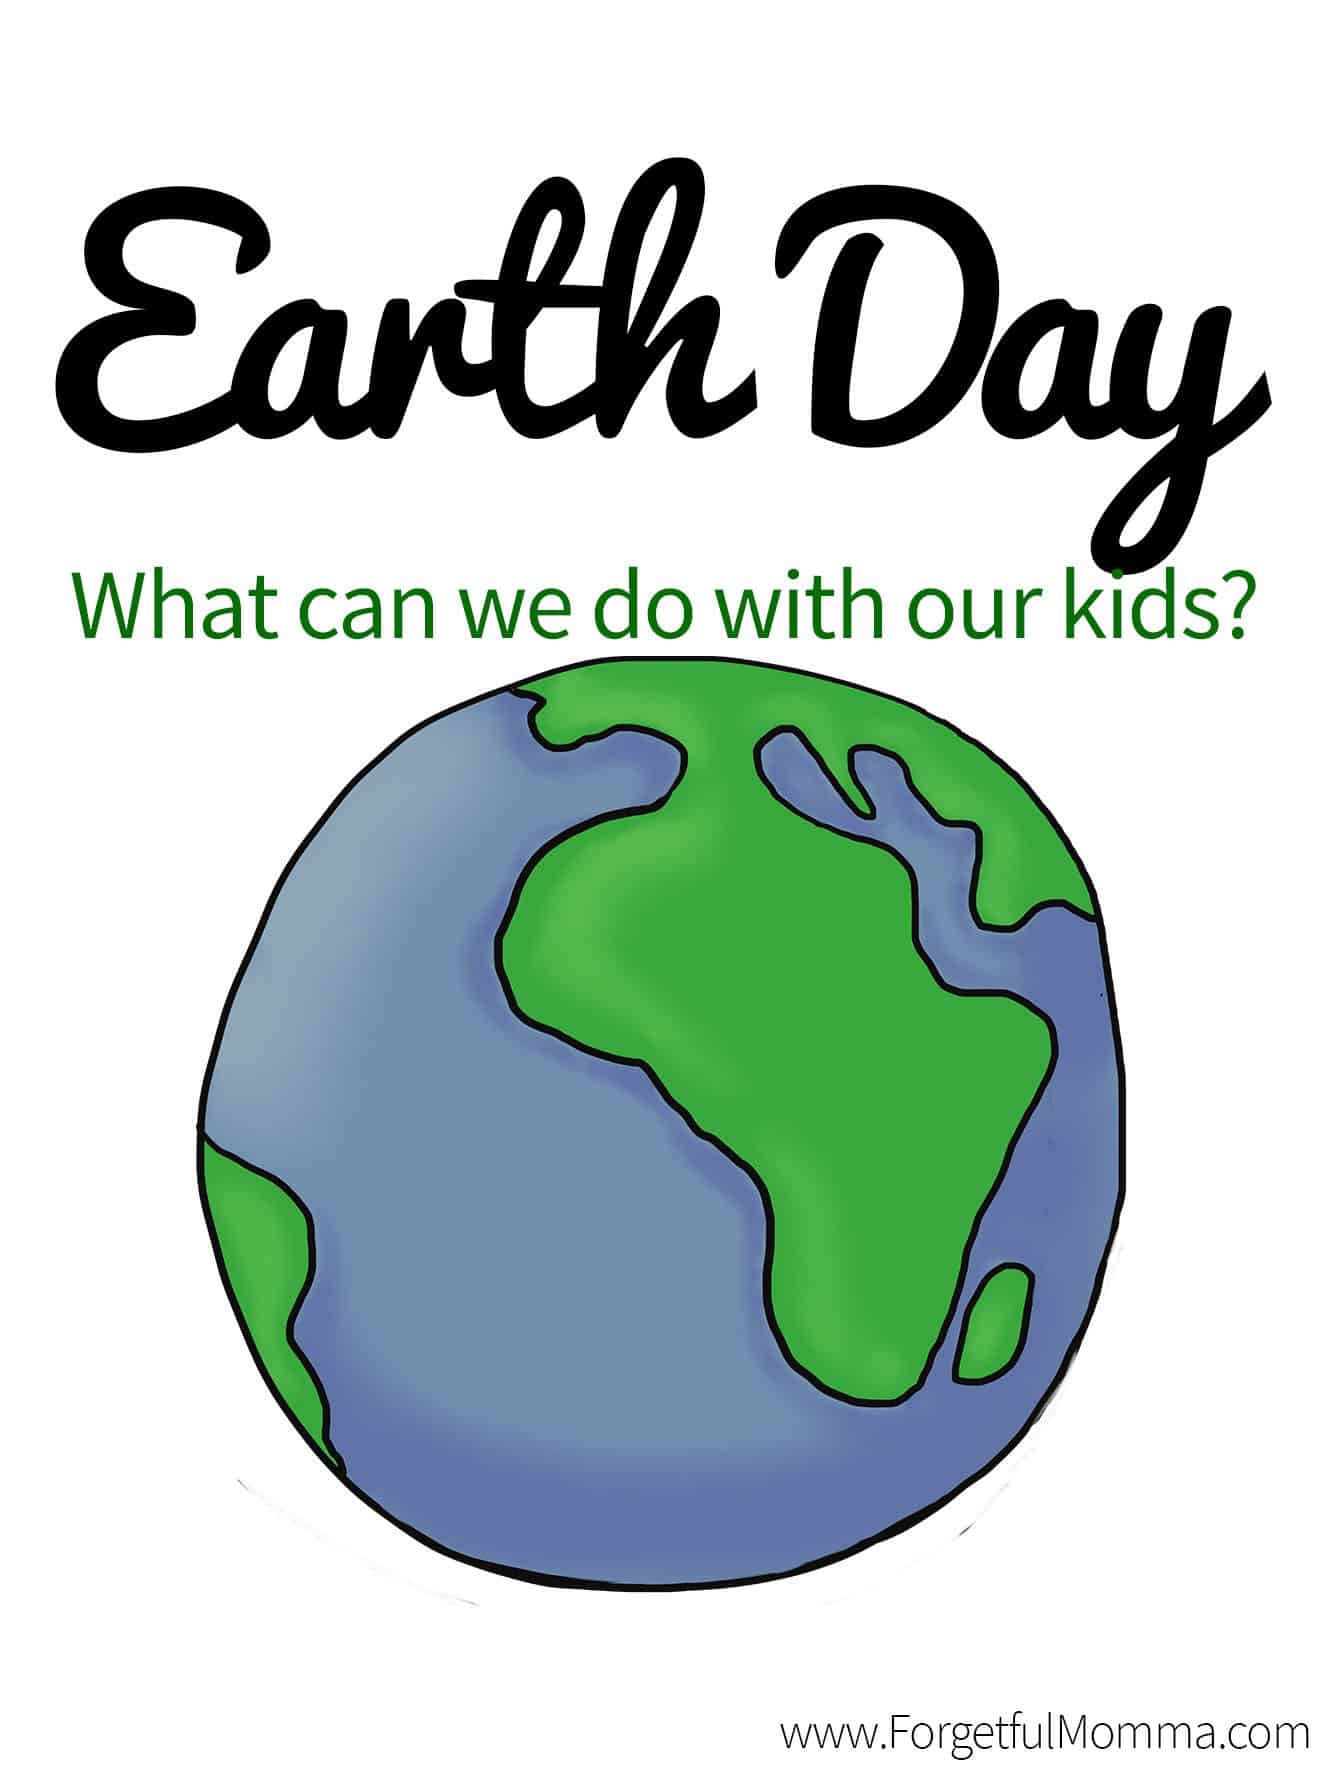 Earth Day - What Can we do with our kids